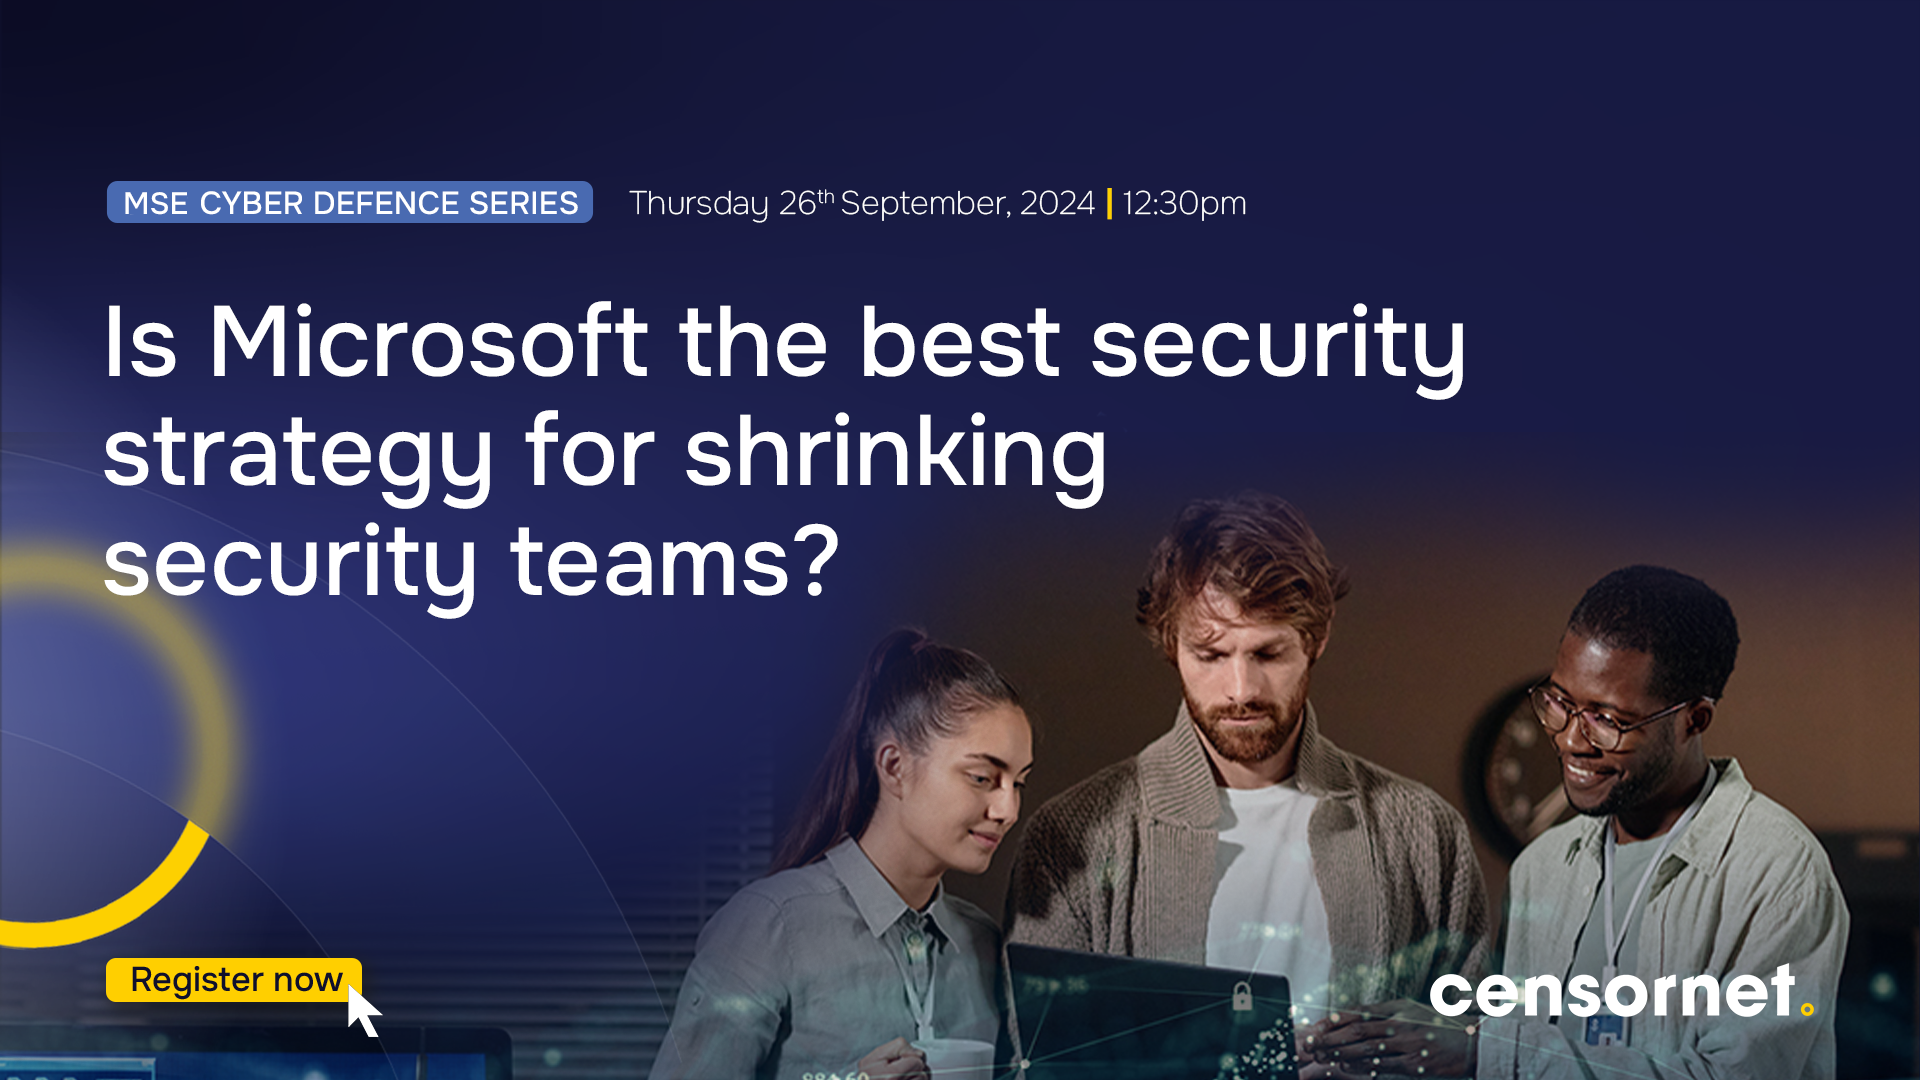 Is Microsoft the best security strategy for shrinking security teams?